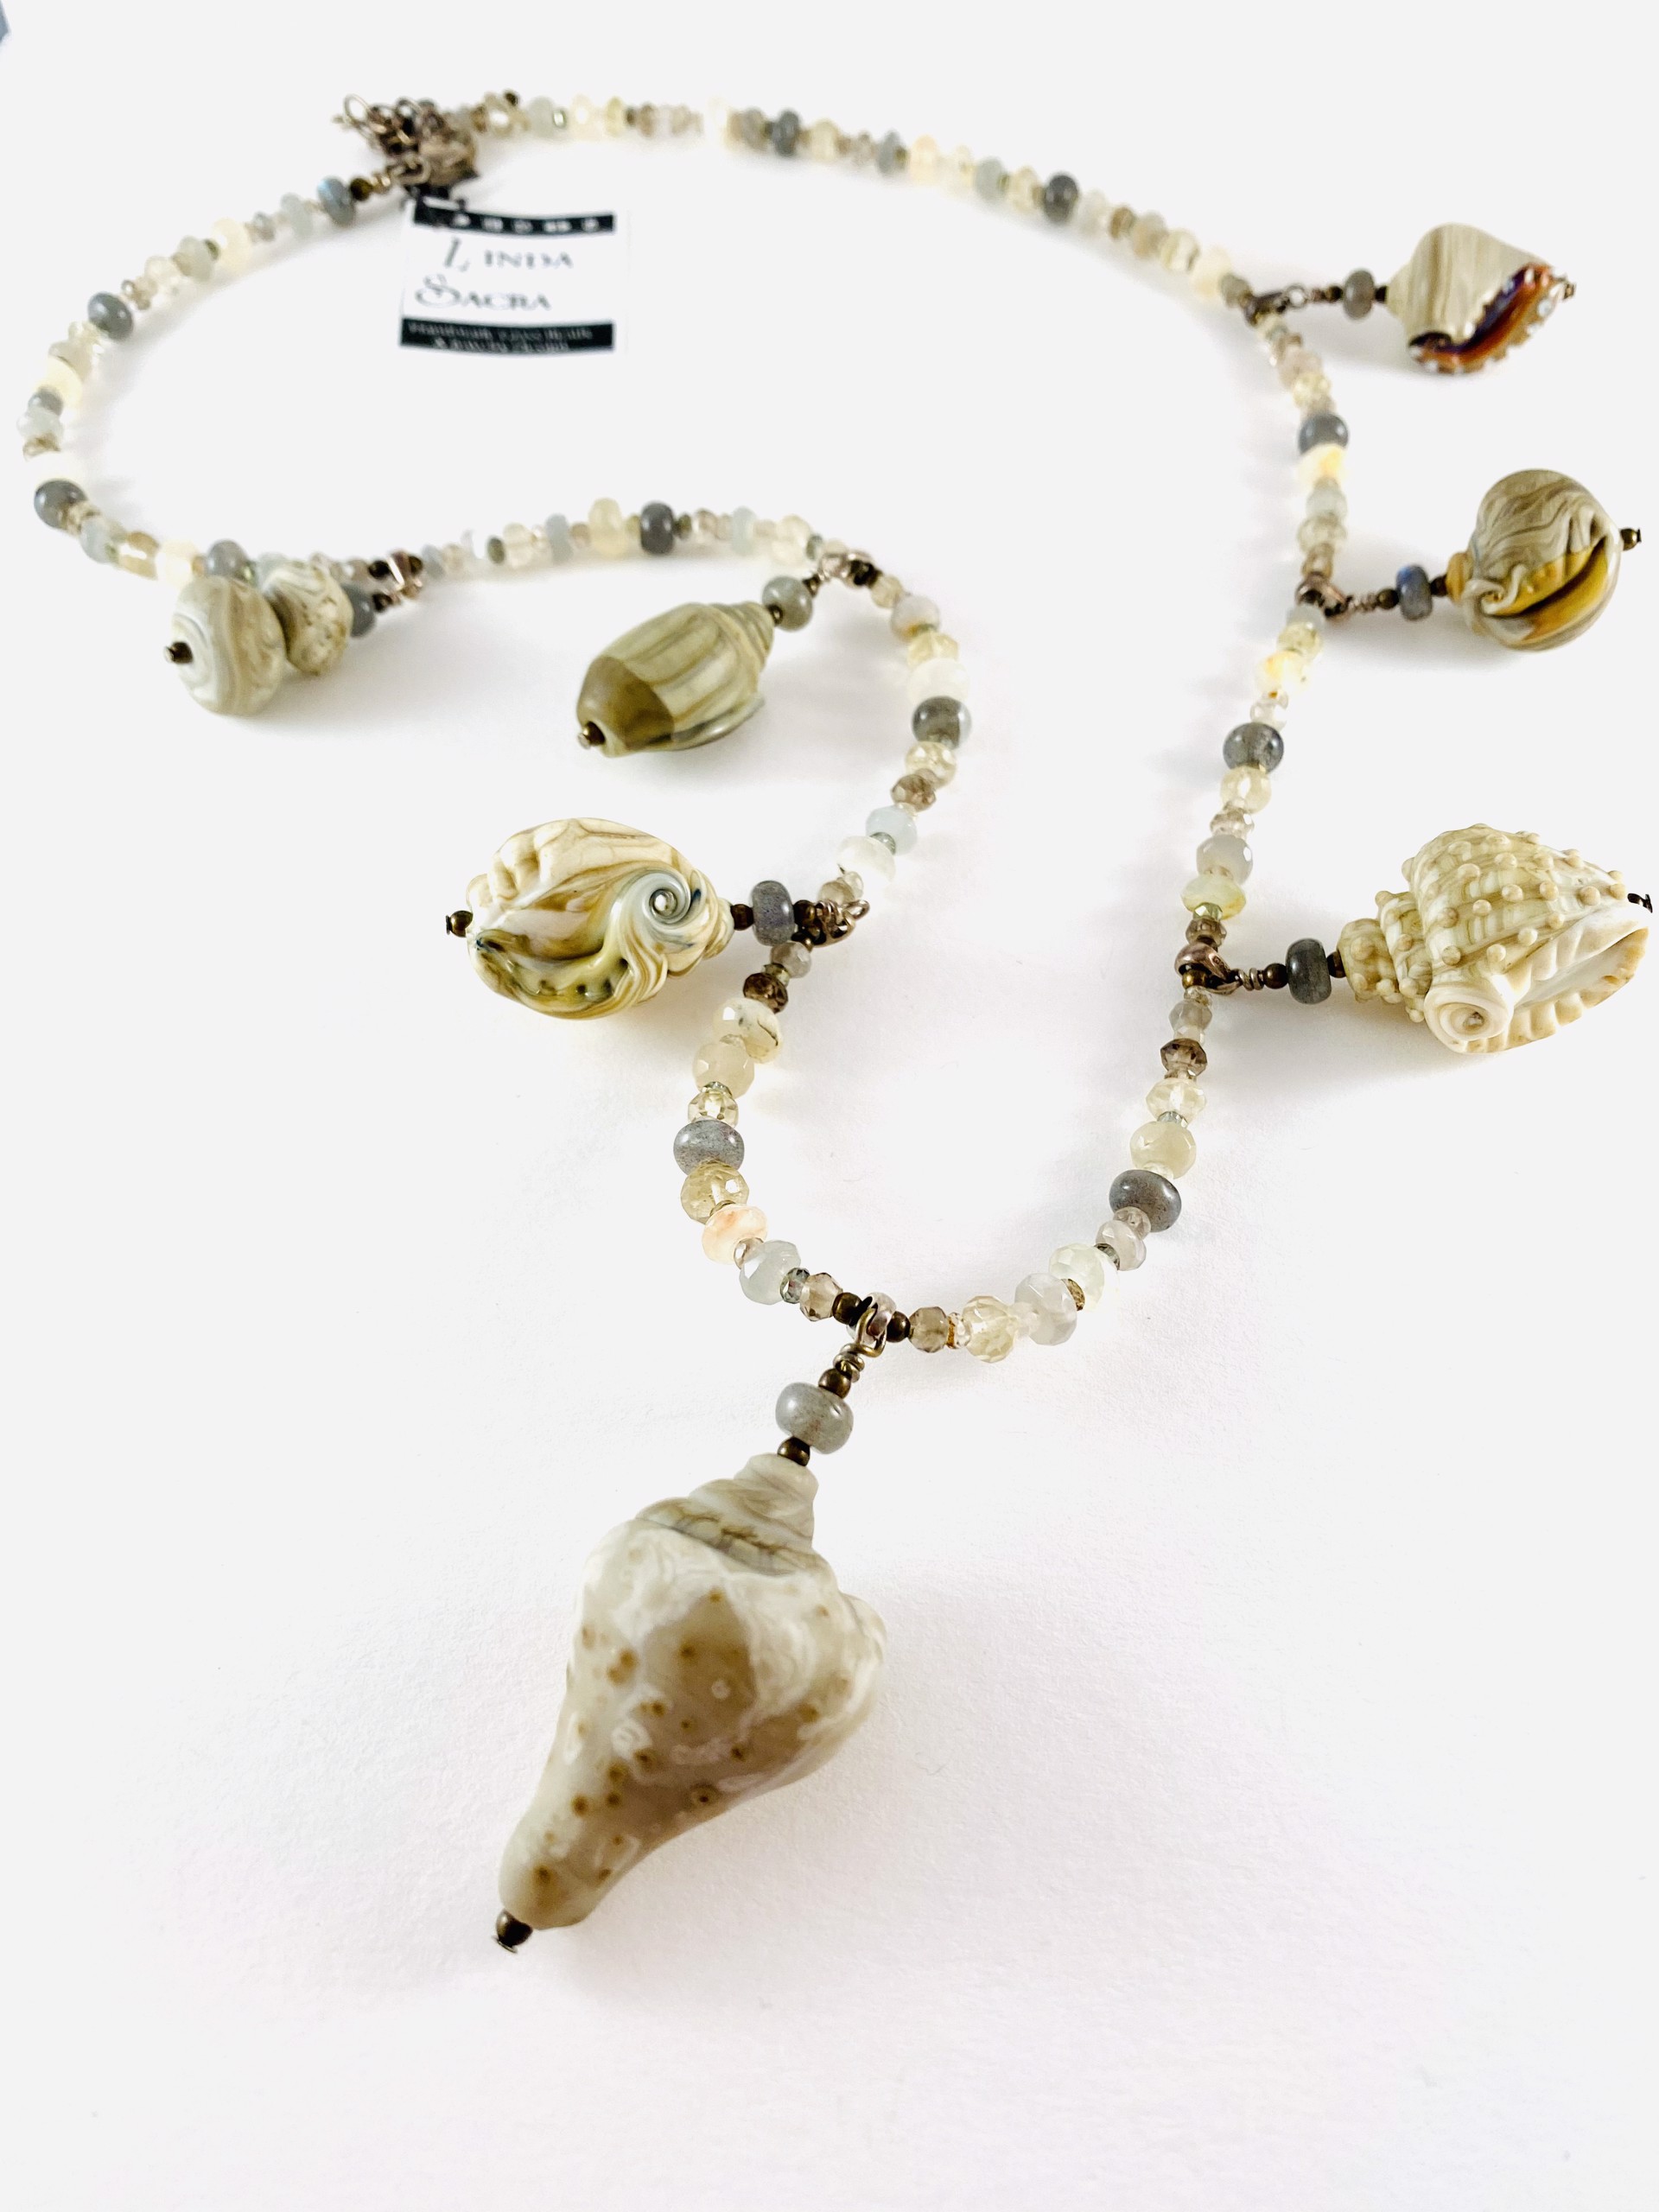 Beach "Shell" and Faceted Semi-Precious Bead Necklace  LS17-265 by Linda Sacra